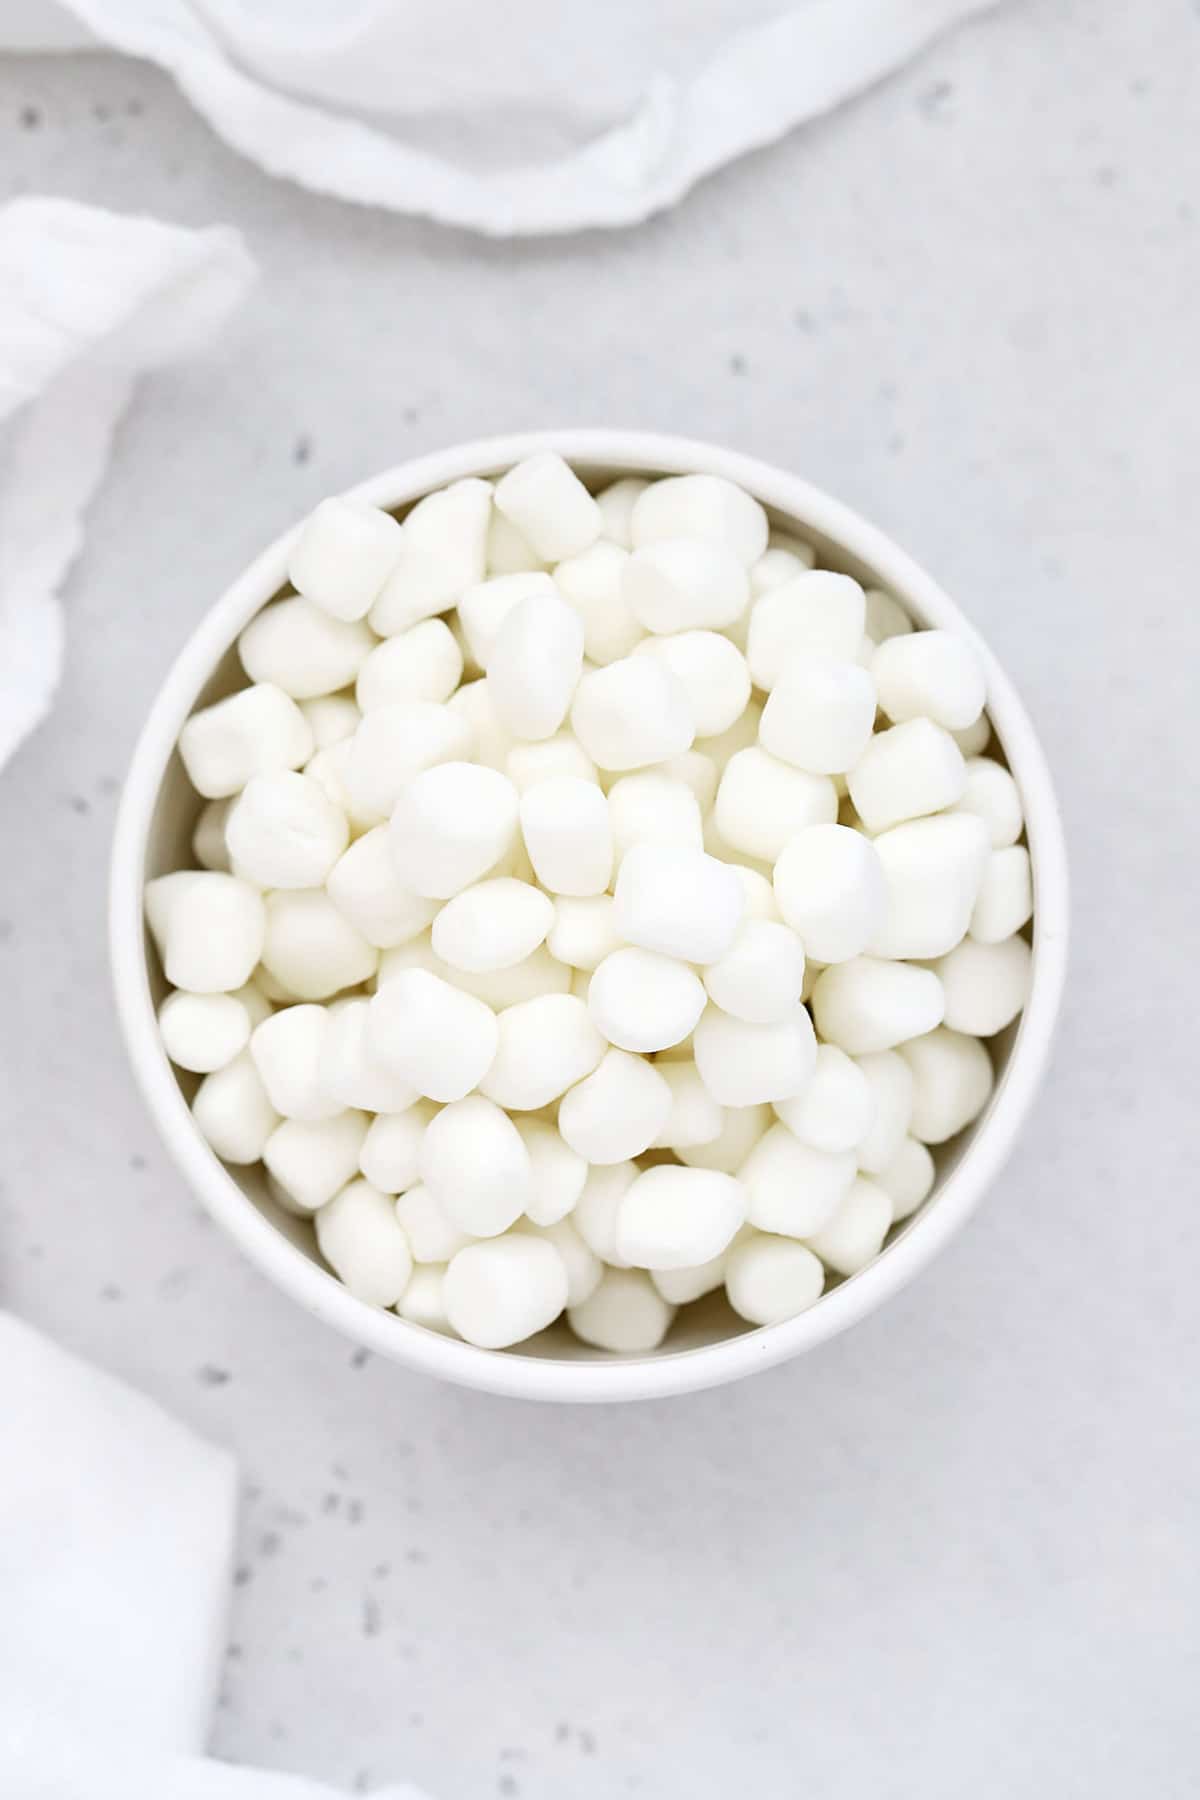 Overhead view of a bowl of mini marshmallows